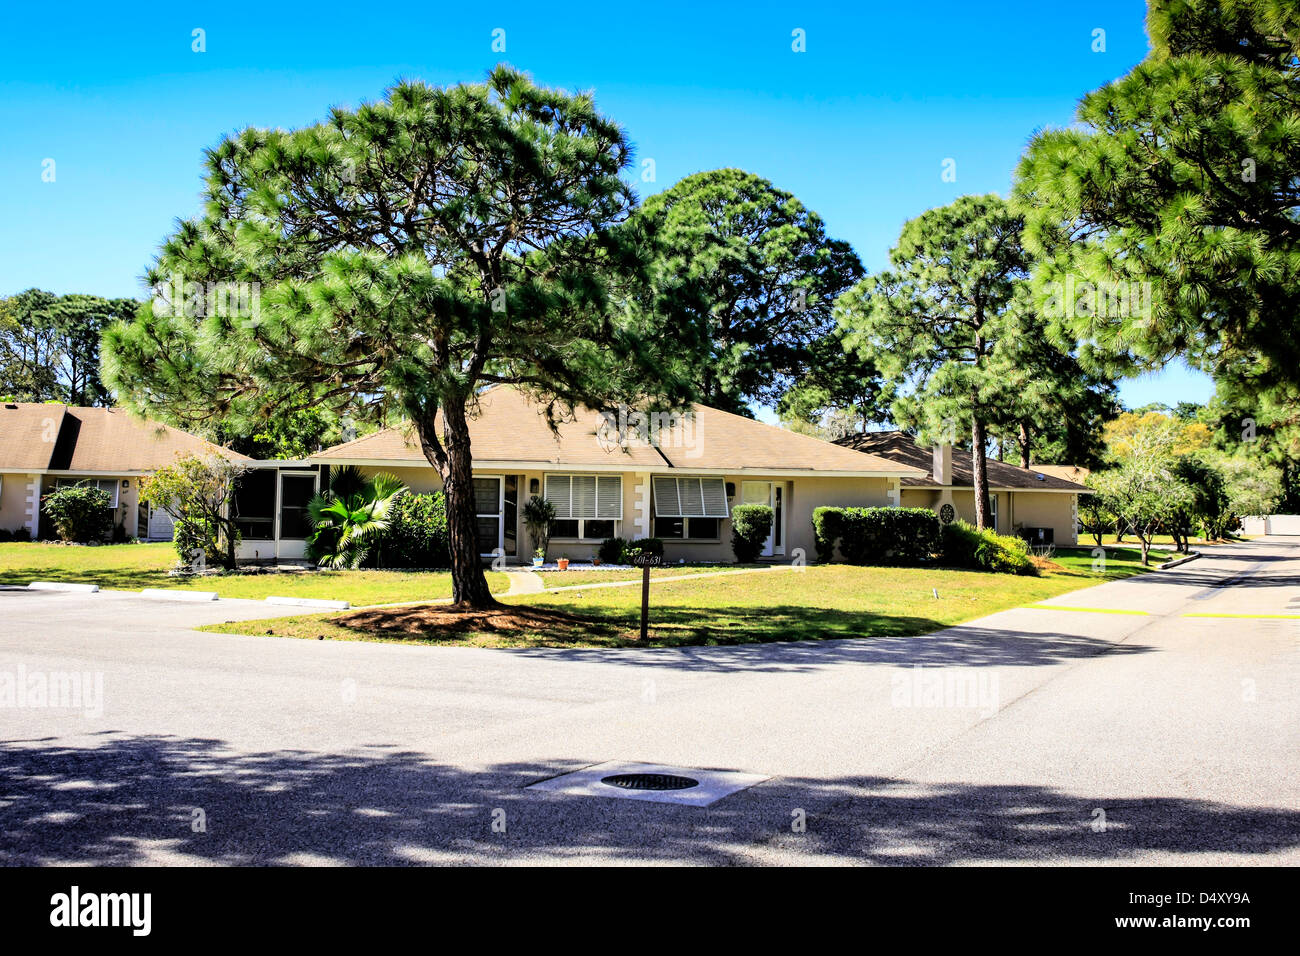 Street view and walled housing development in Sarasota Florida Stock Photo